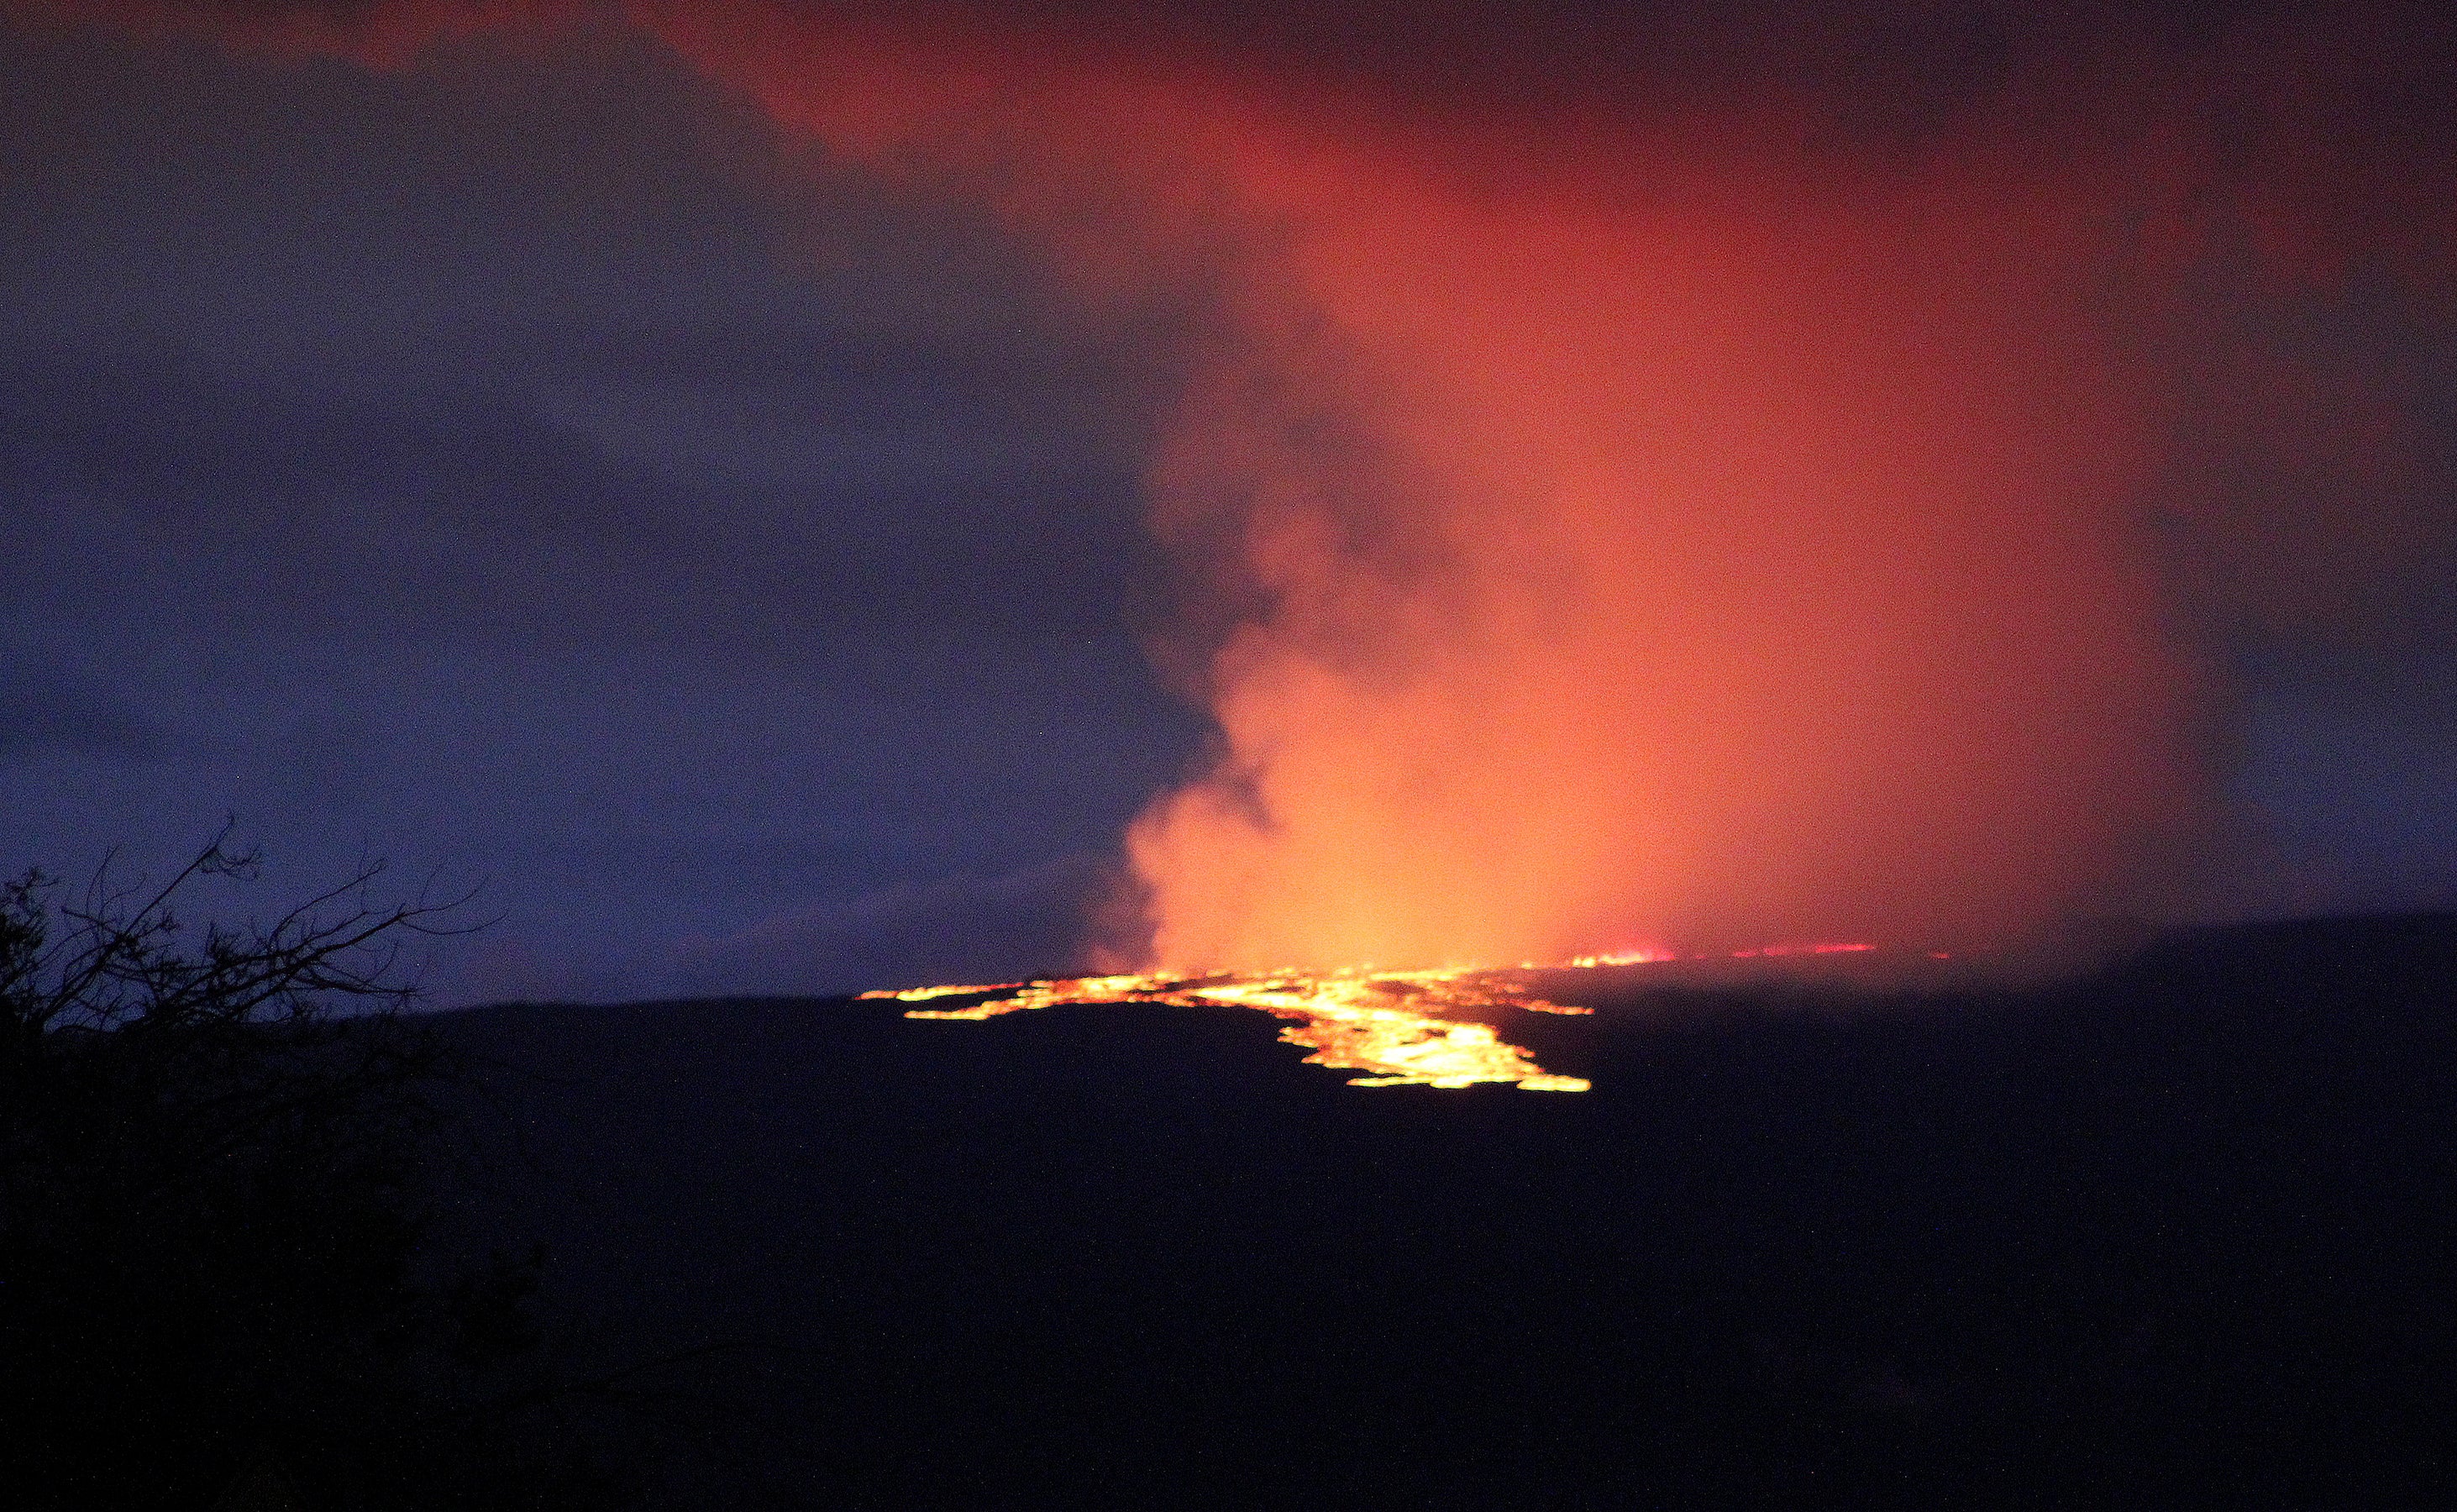 Lava pours out of the summit crater of Mauna Loa about 6:35am on 28 November 28 2022, as seen from Gilbert Kahele Recreation Area on Maunakea, Hawaii